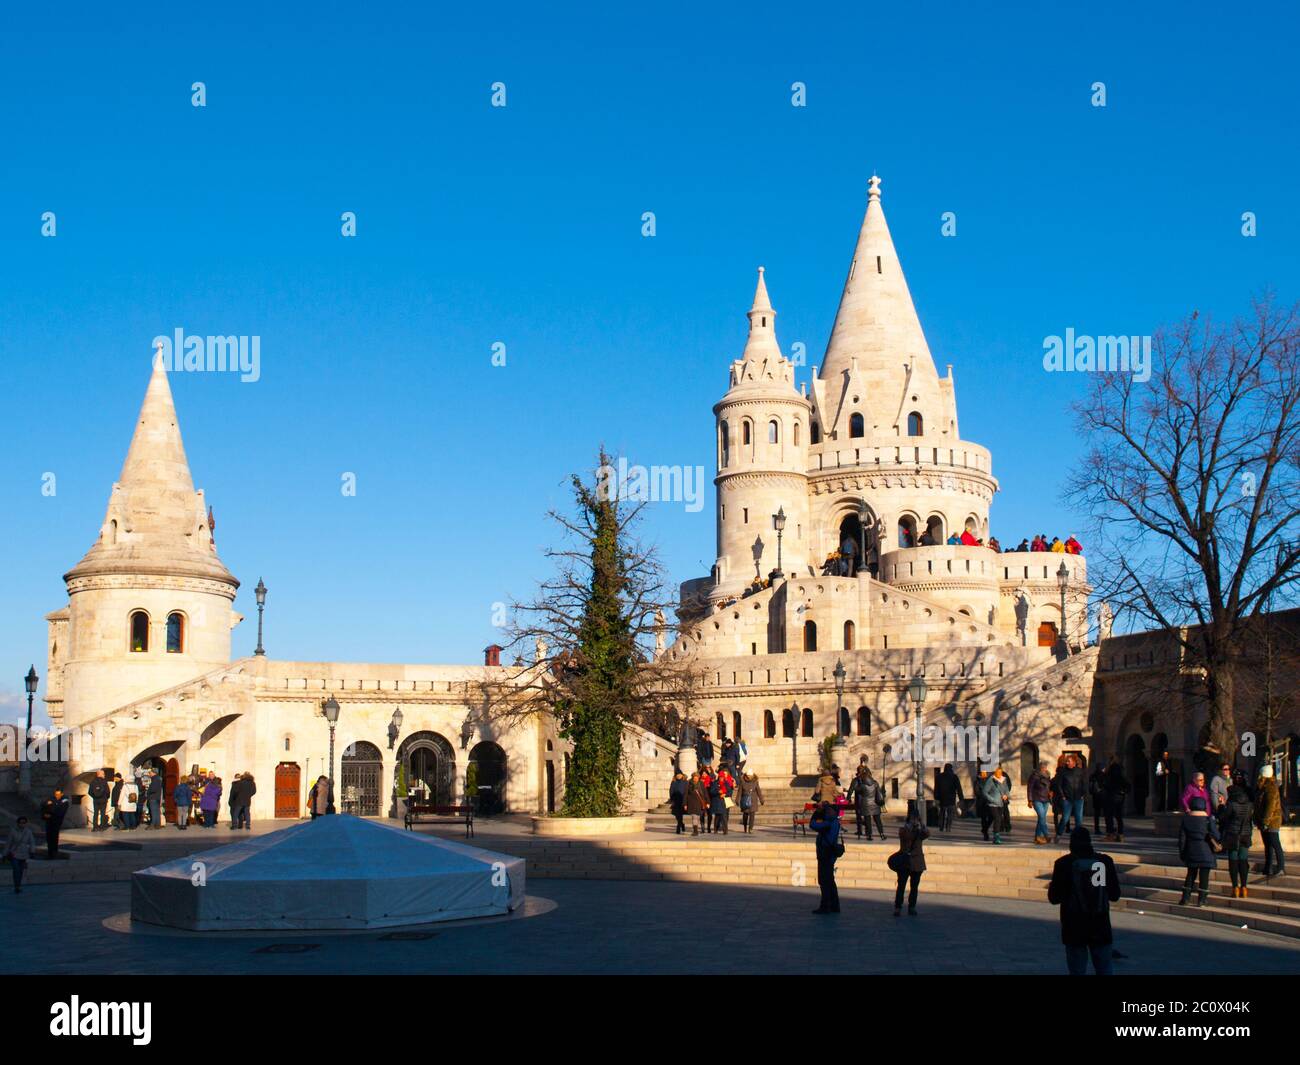 Typical light stone rounded fairy tale towers of Fisherman's Bastion, aka Halaszbastya, on a terrace in neo-Gothic and neo-Romanesque architectural style. Lookout turrets are situated on a Buda bank side of Danube River in Budapest, capital city of Hungary, Europe. UNESCO World Heritage Site Stock Photo